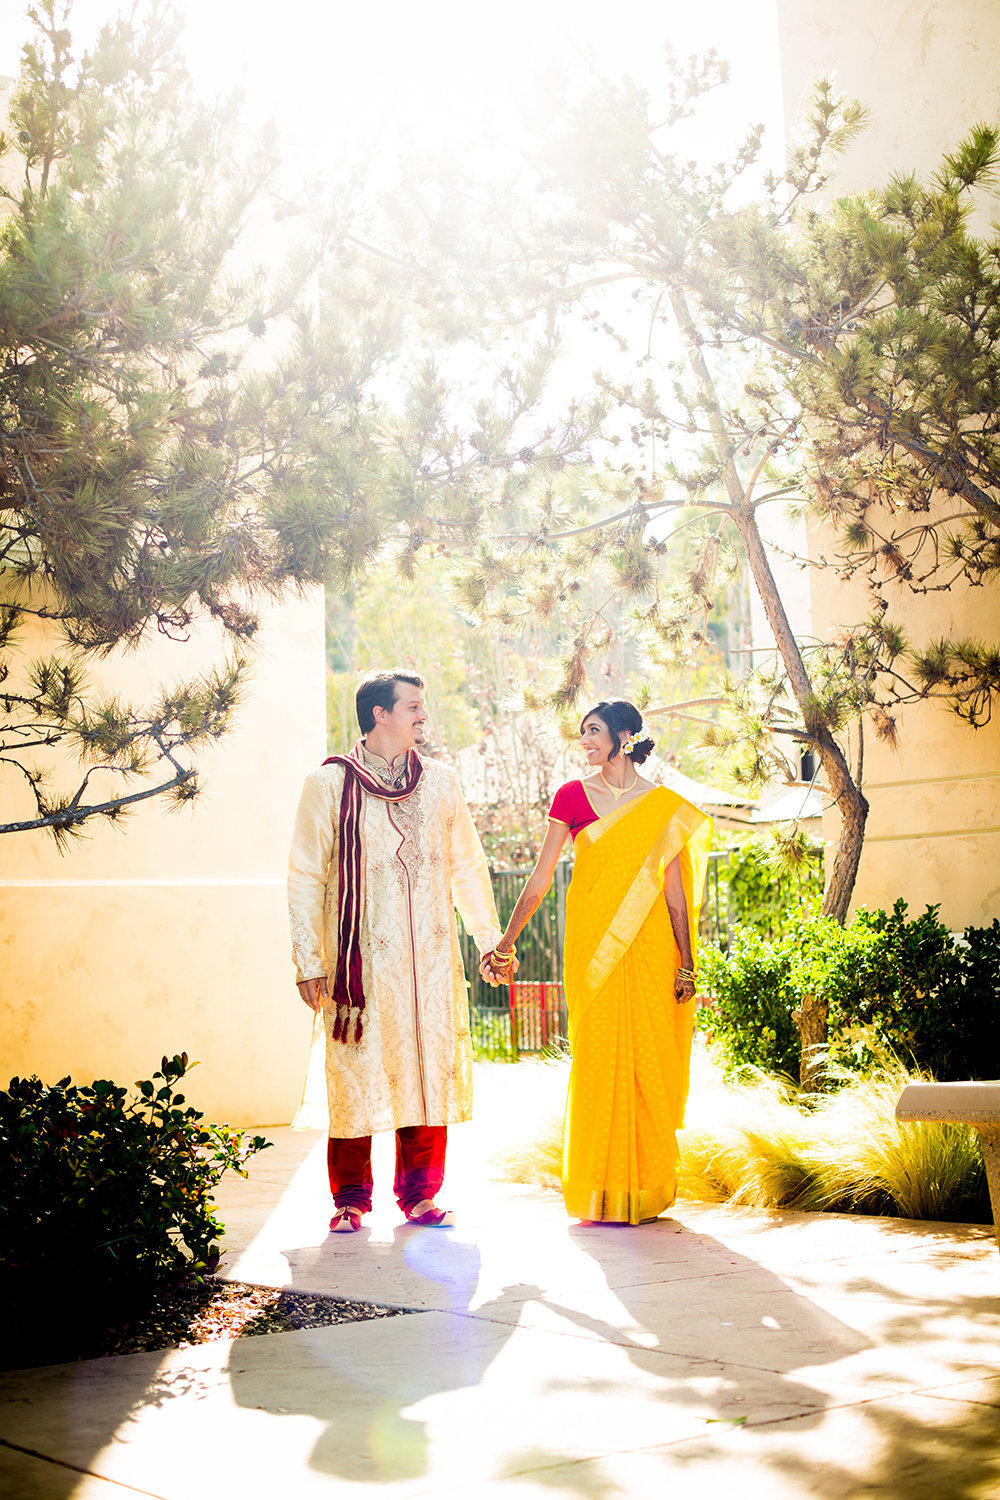 Cute Pose for Indian Hindu Couple with Bride in Sari and Groom in Sherwani